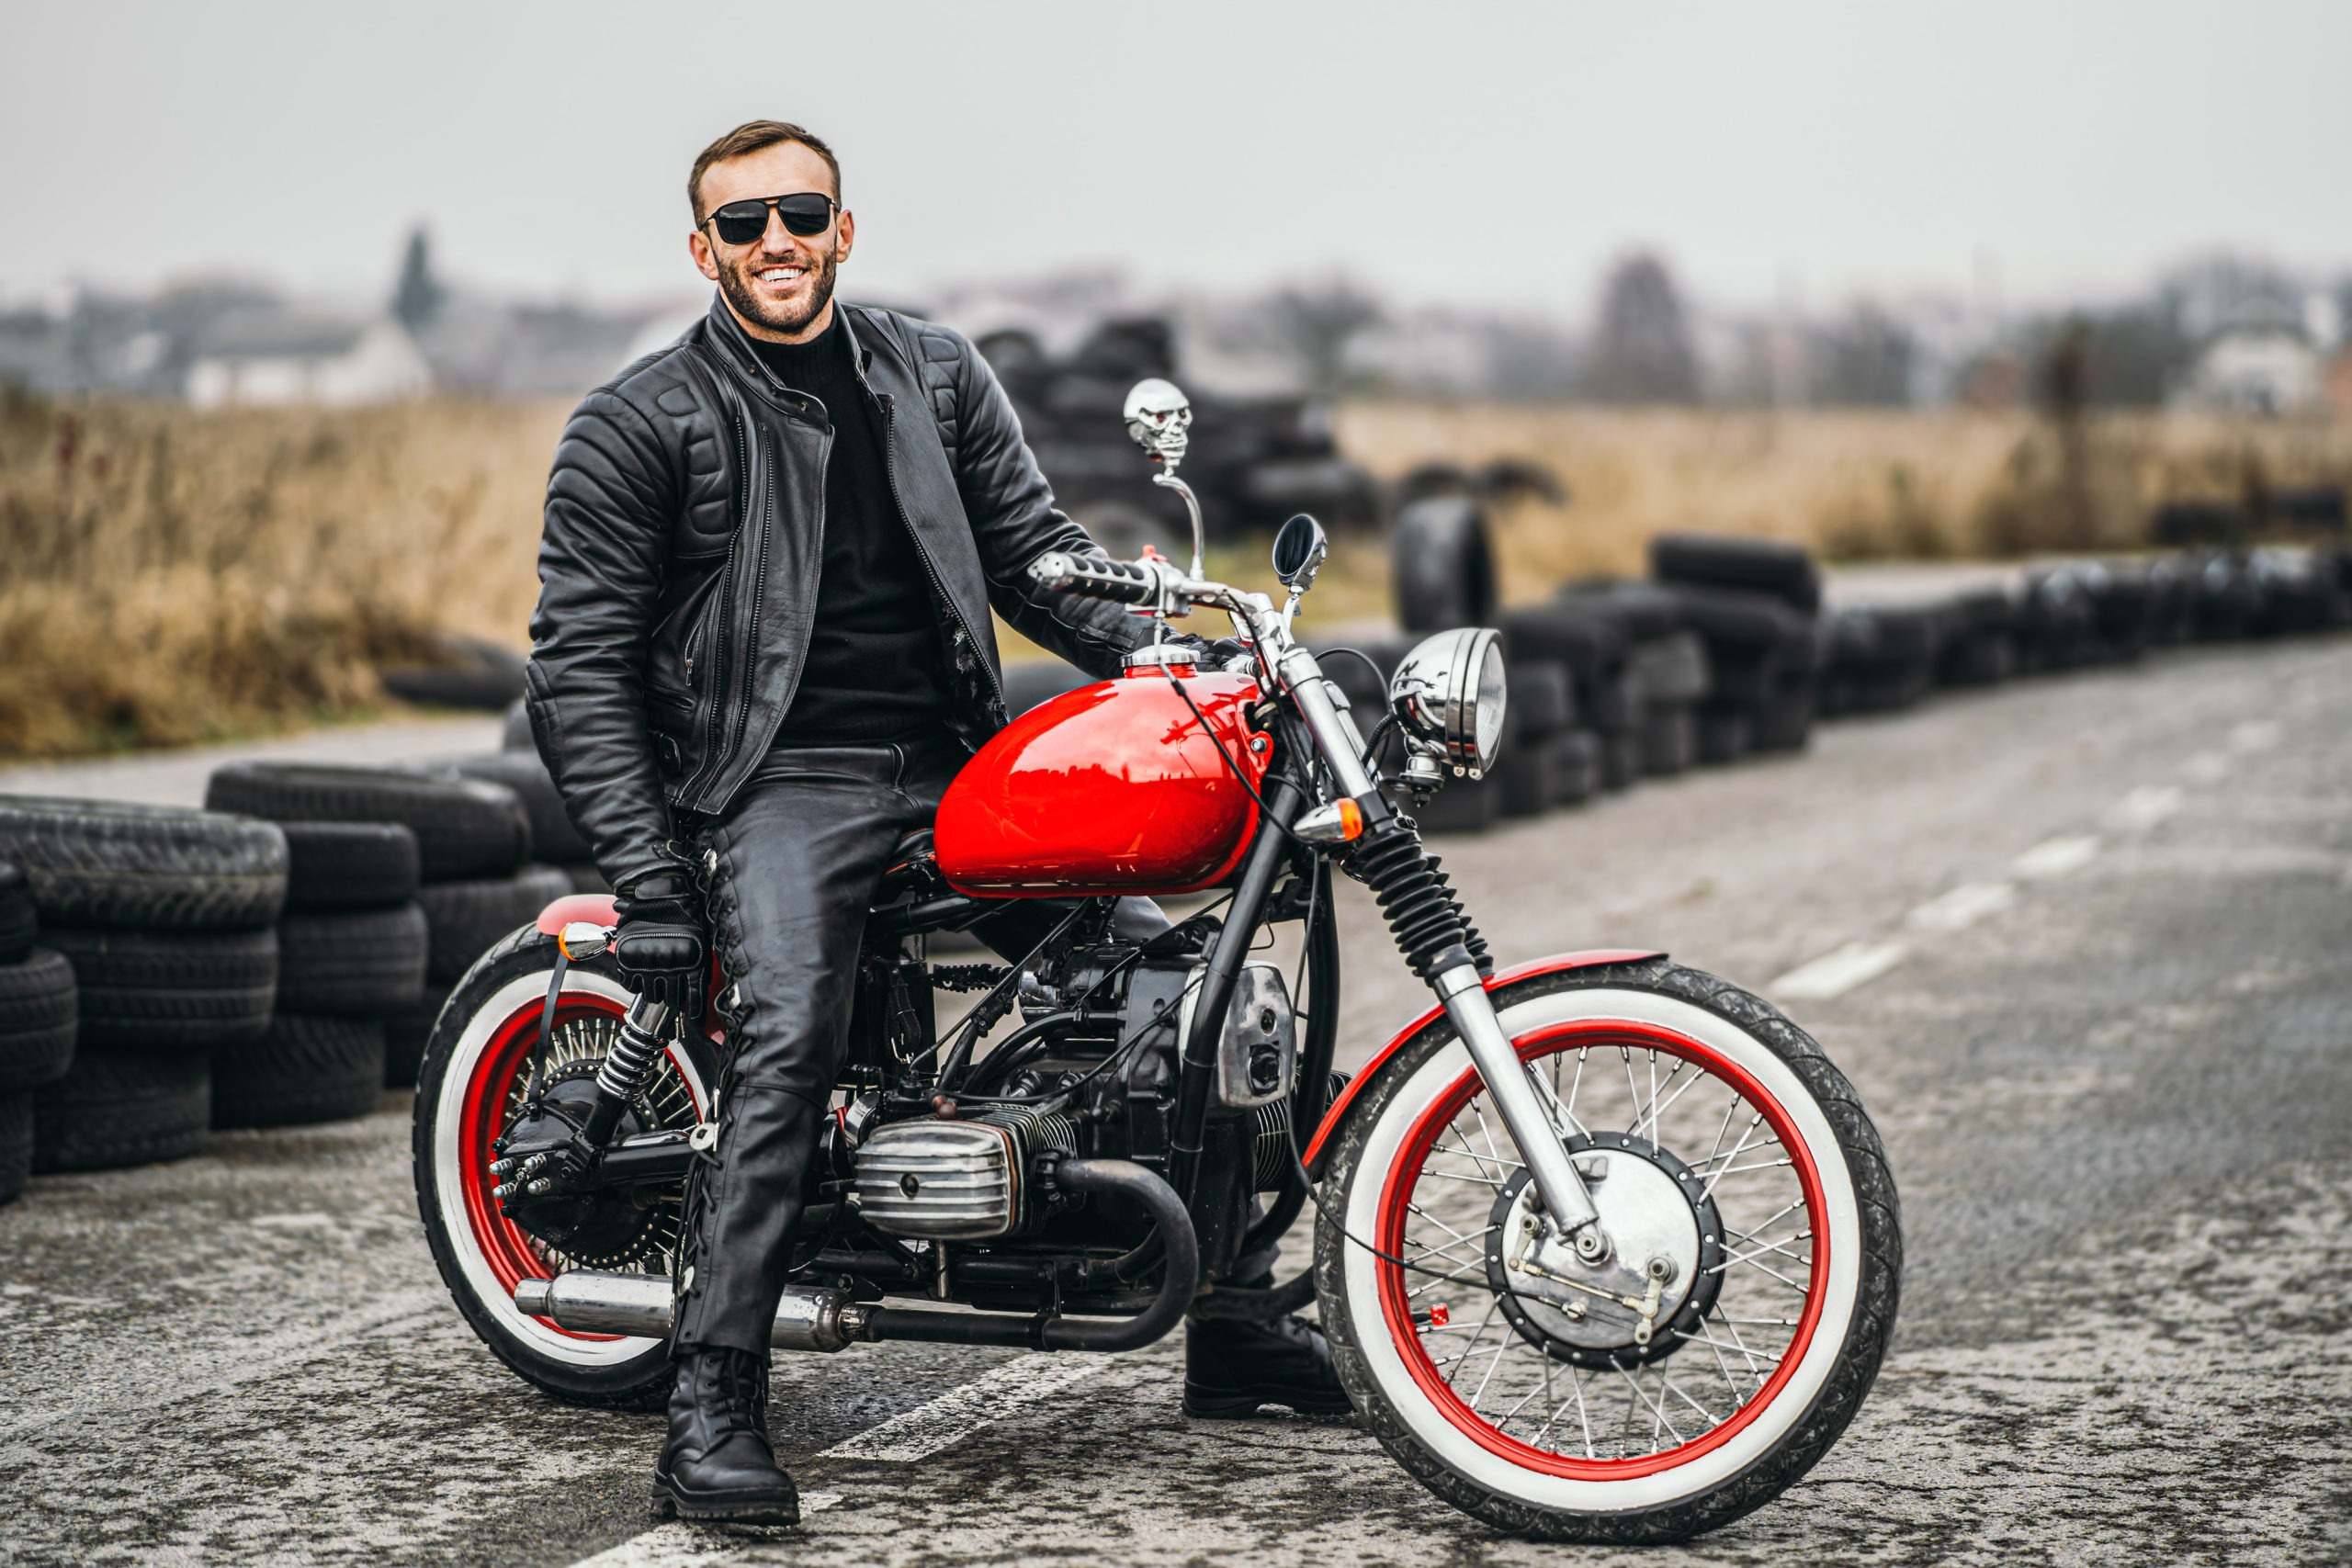 Red motorbike with rider. A man in a black leather jacket and pa